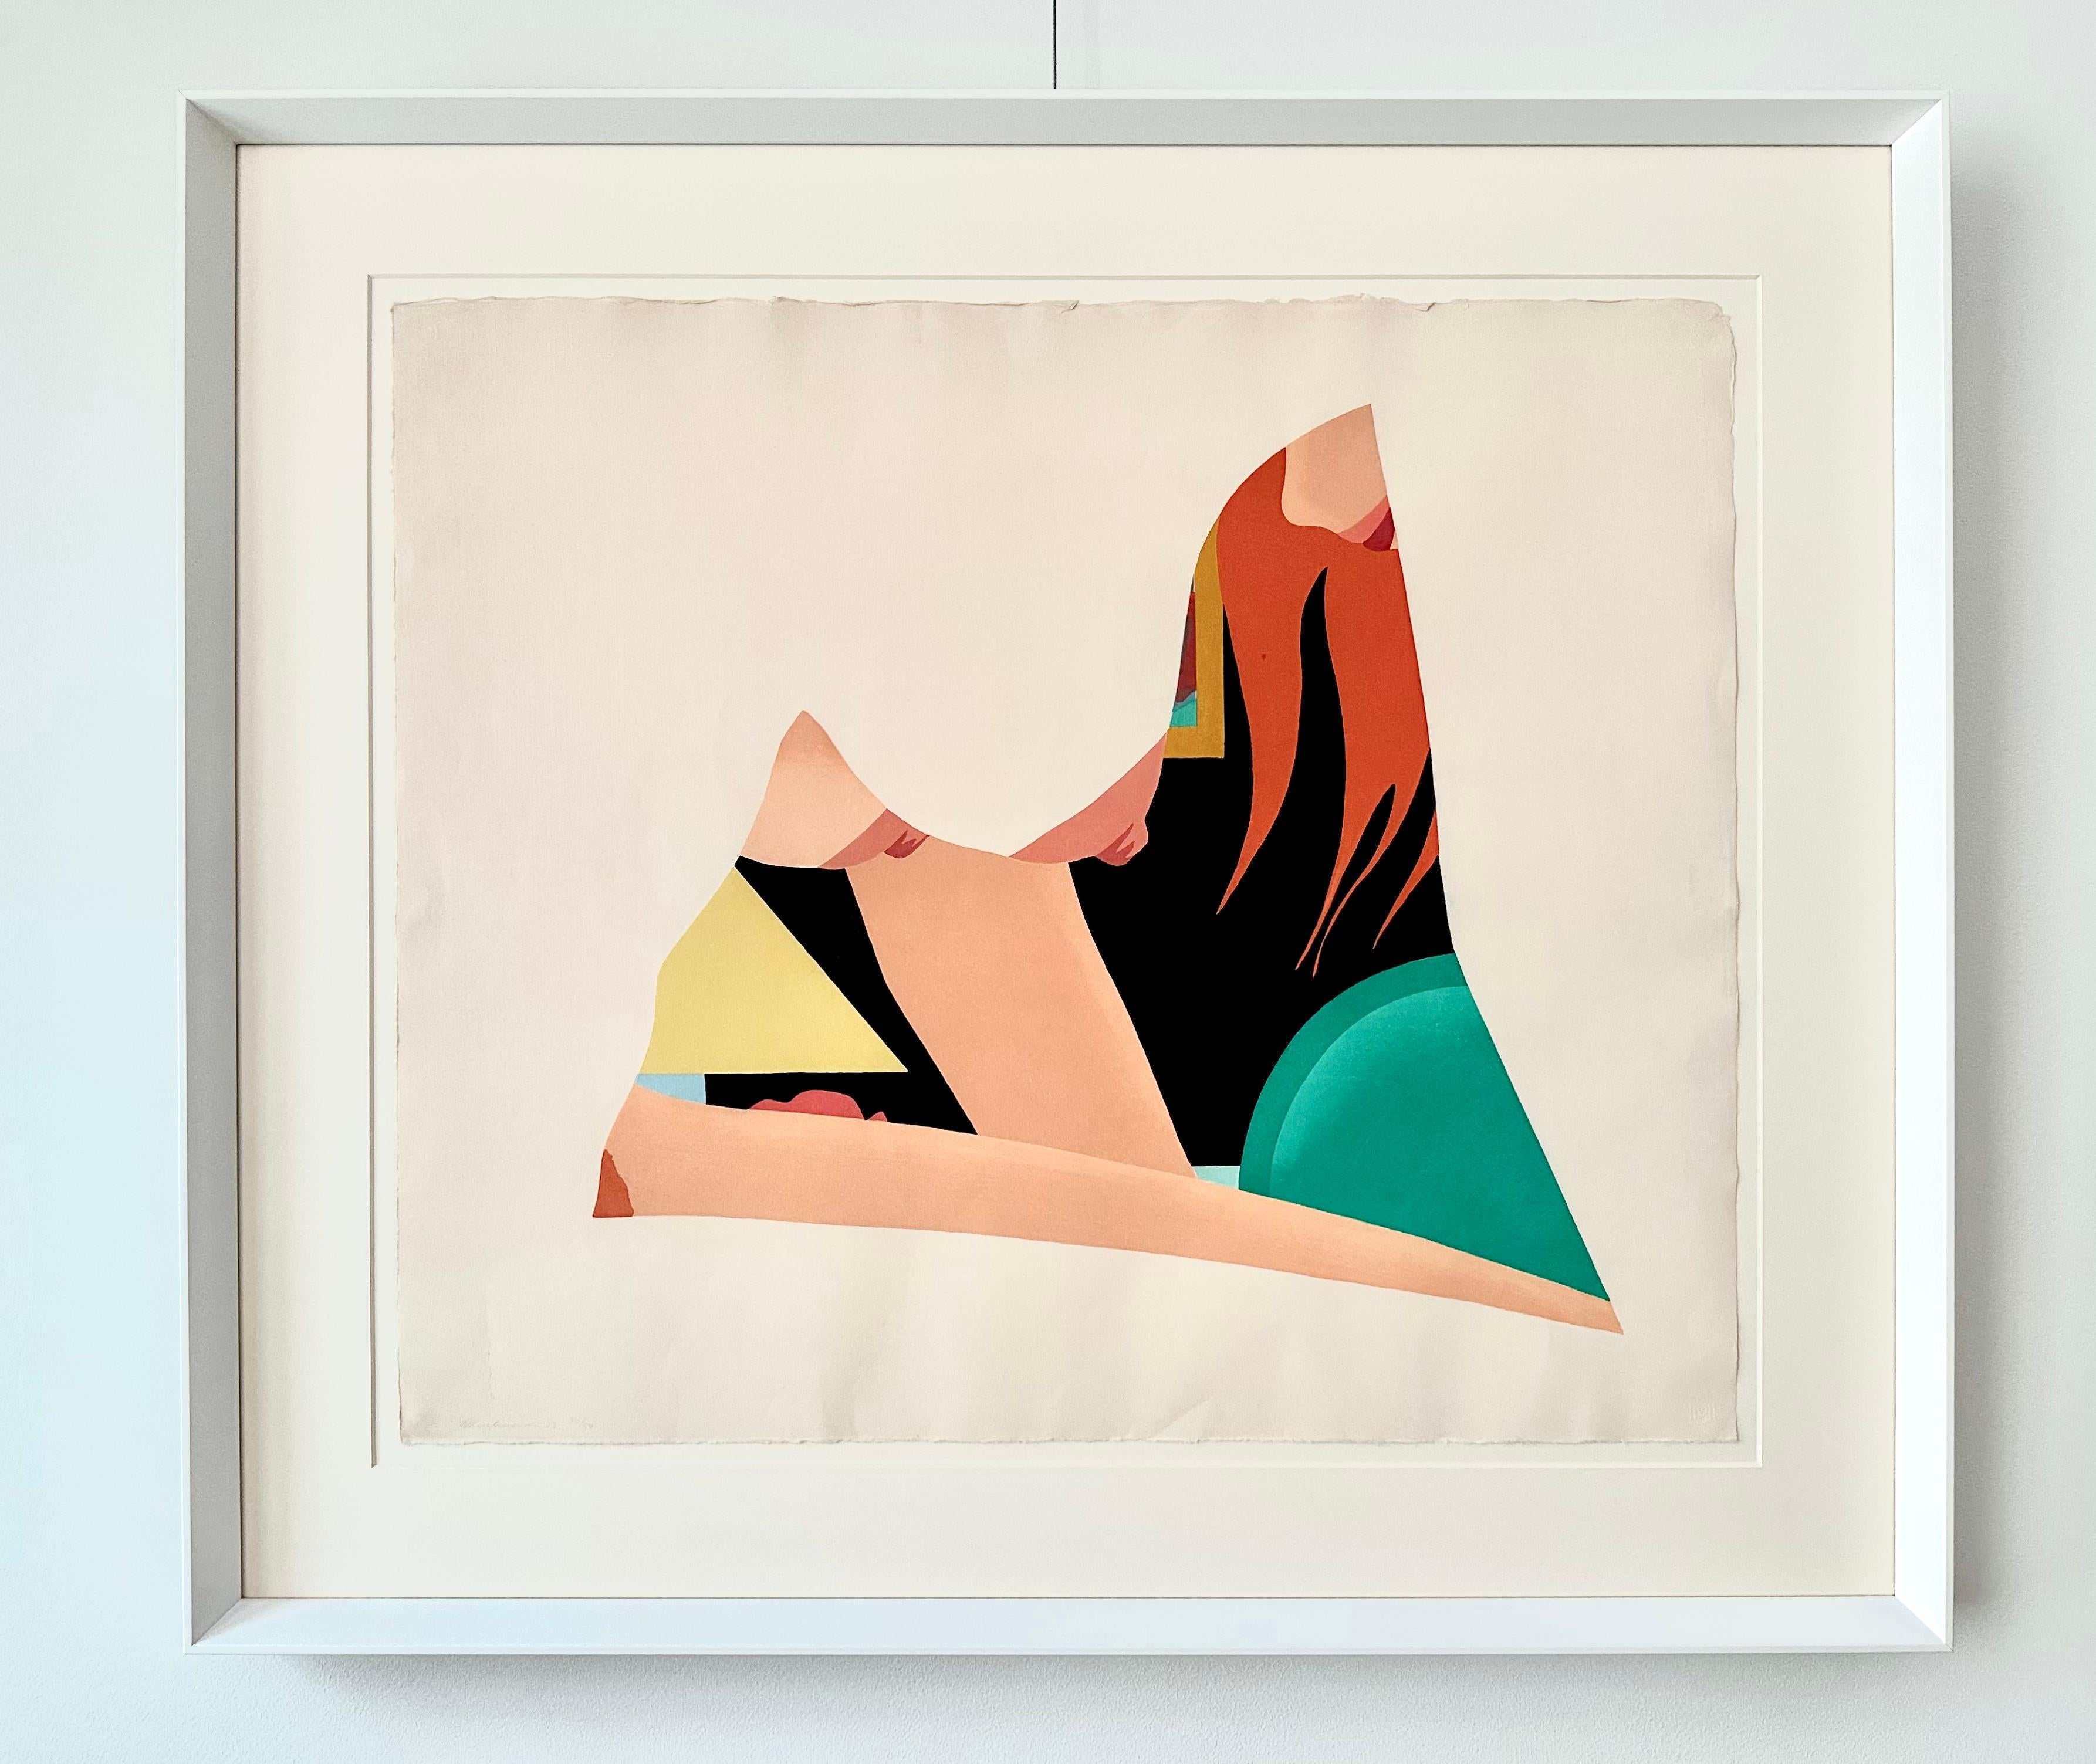 Bedroom Dropout - Print by Tom Wesselmann